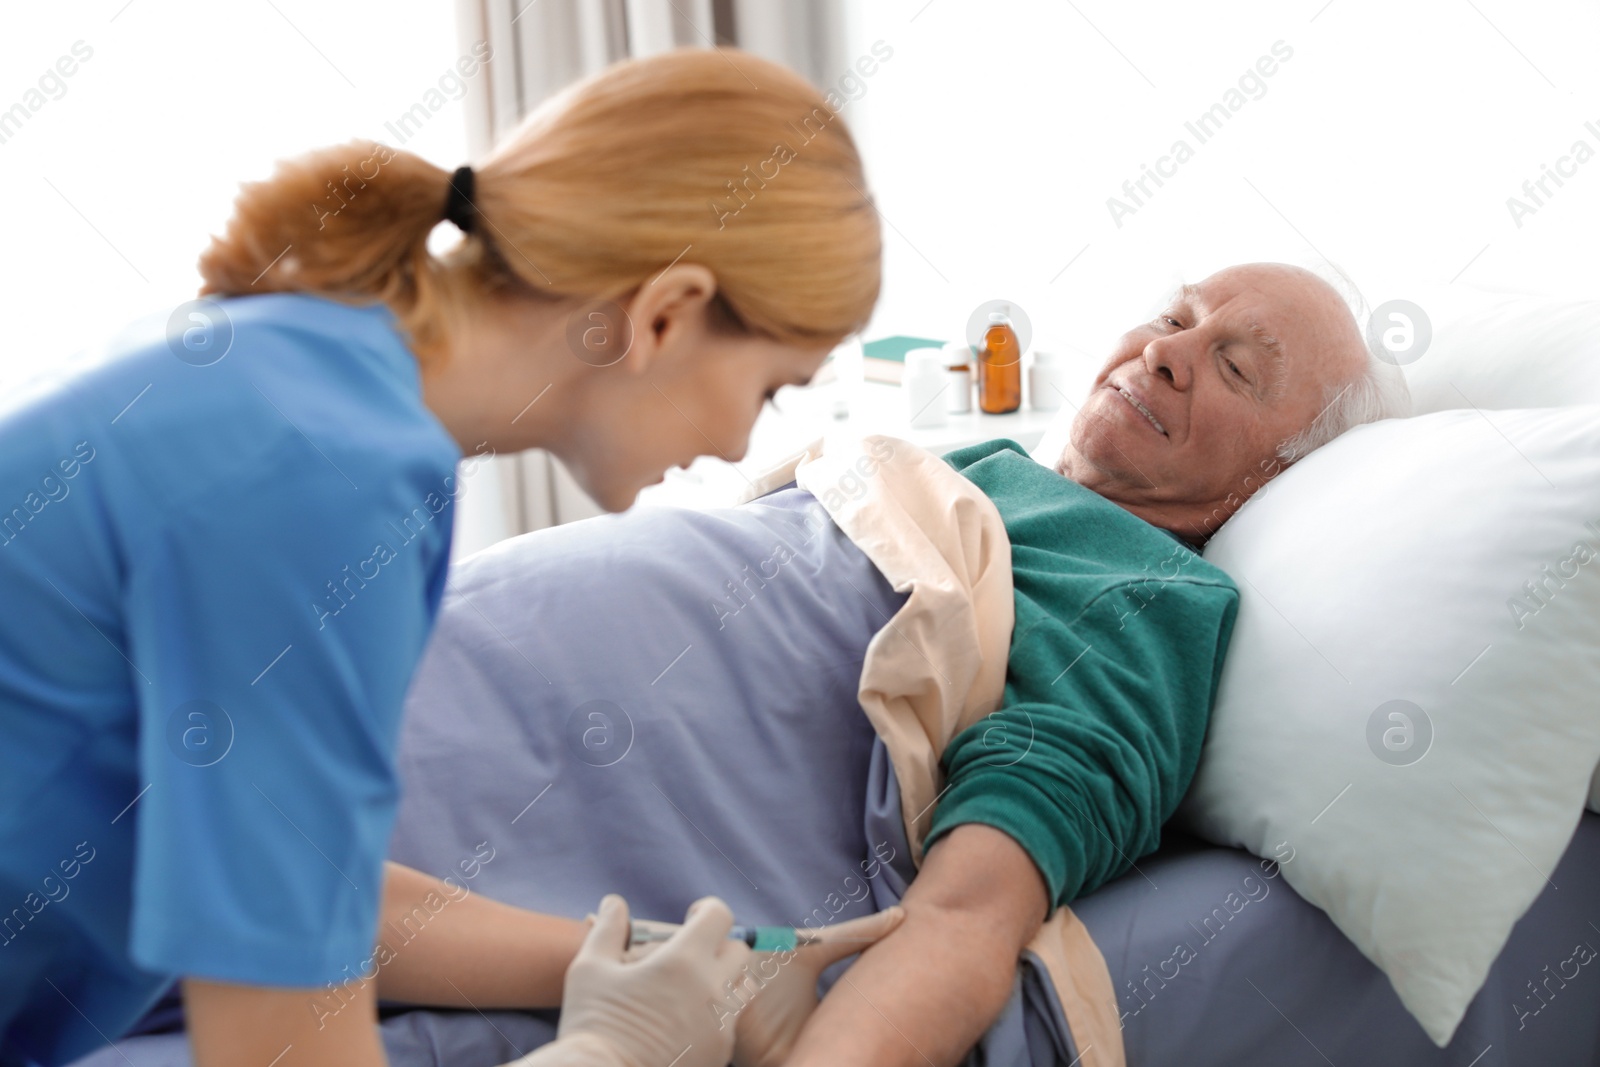 Photo of Nurse making injection to elderly man on bed indoors. Medical assistance